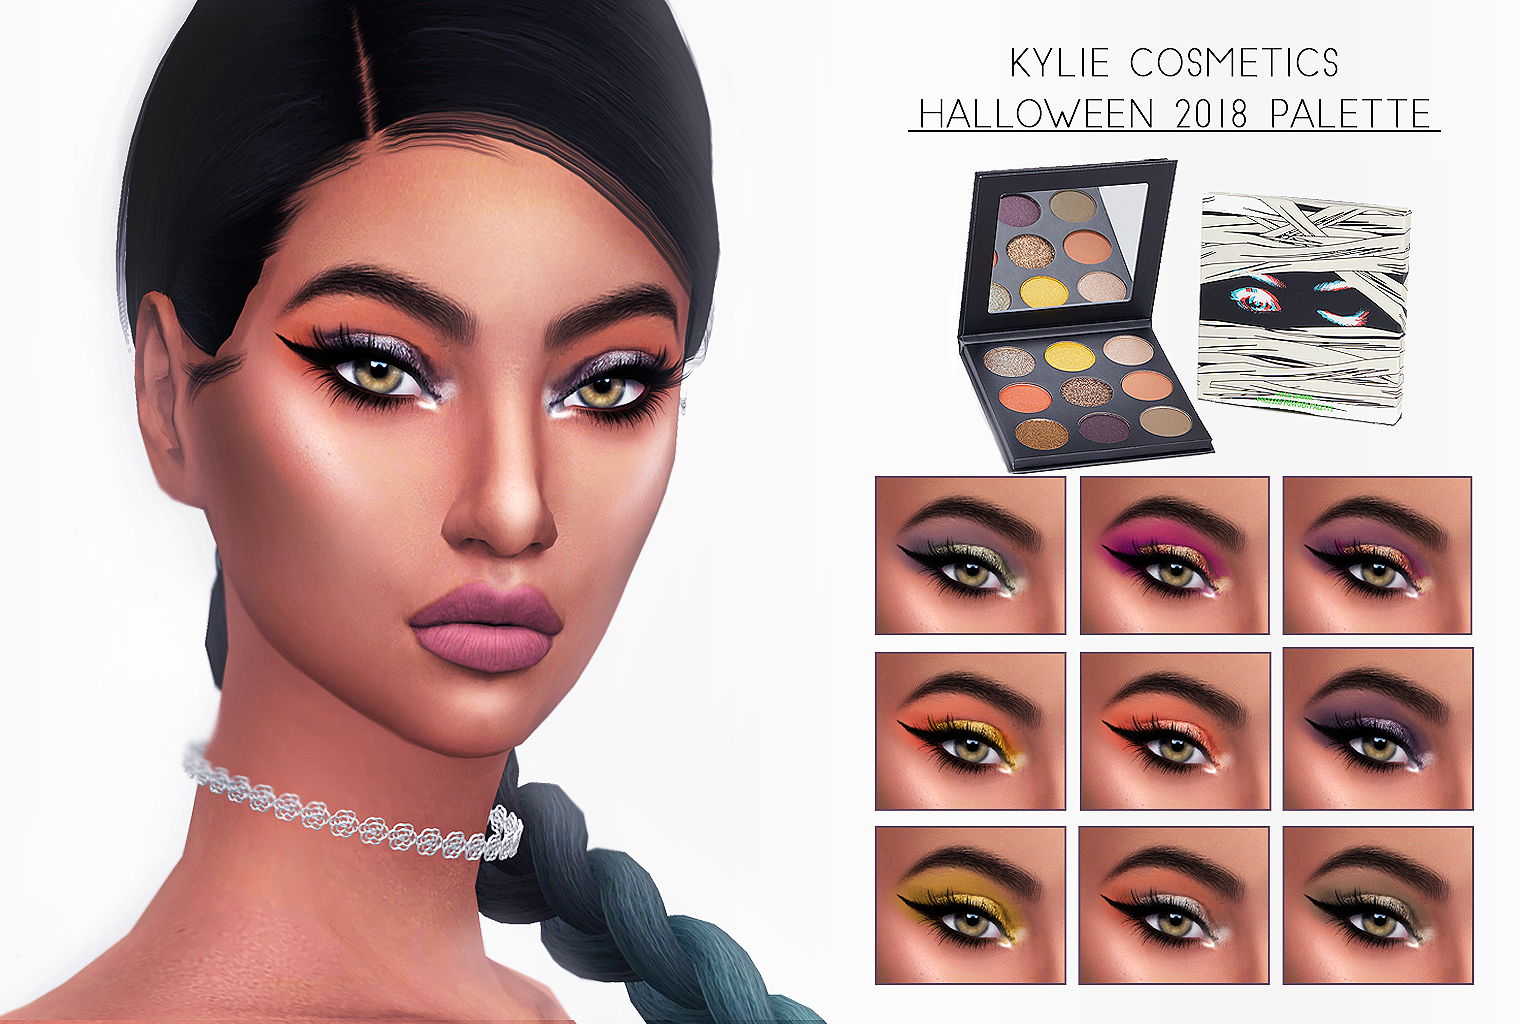 Female Eyeshadow Makeup The Sims 4 P1 Sims4 Clove Share Asia Tổng